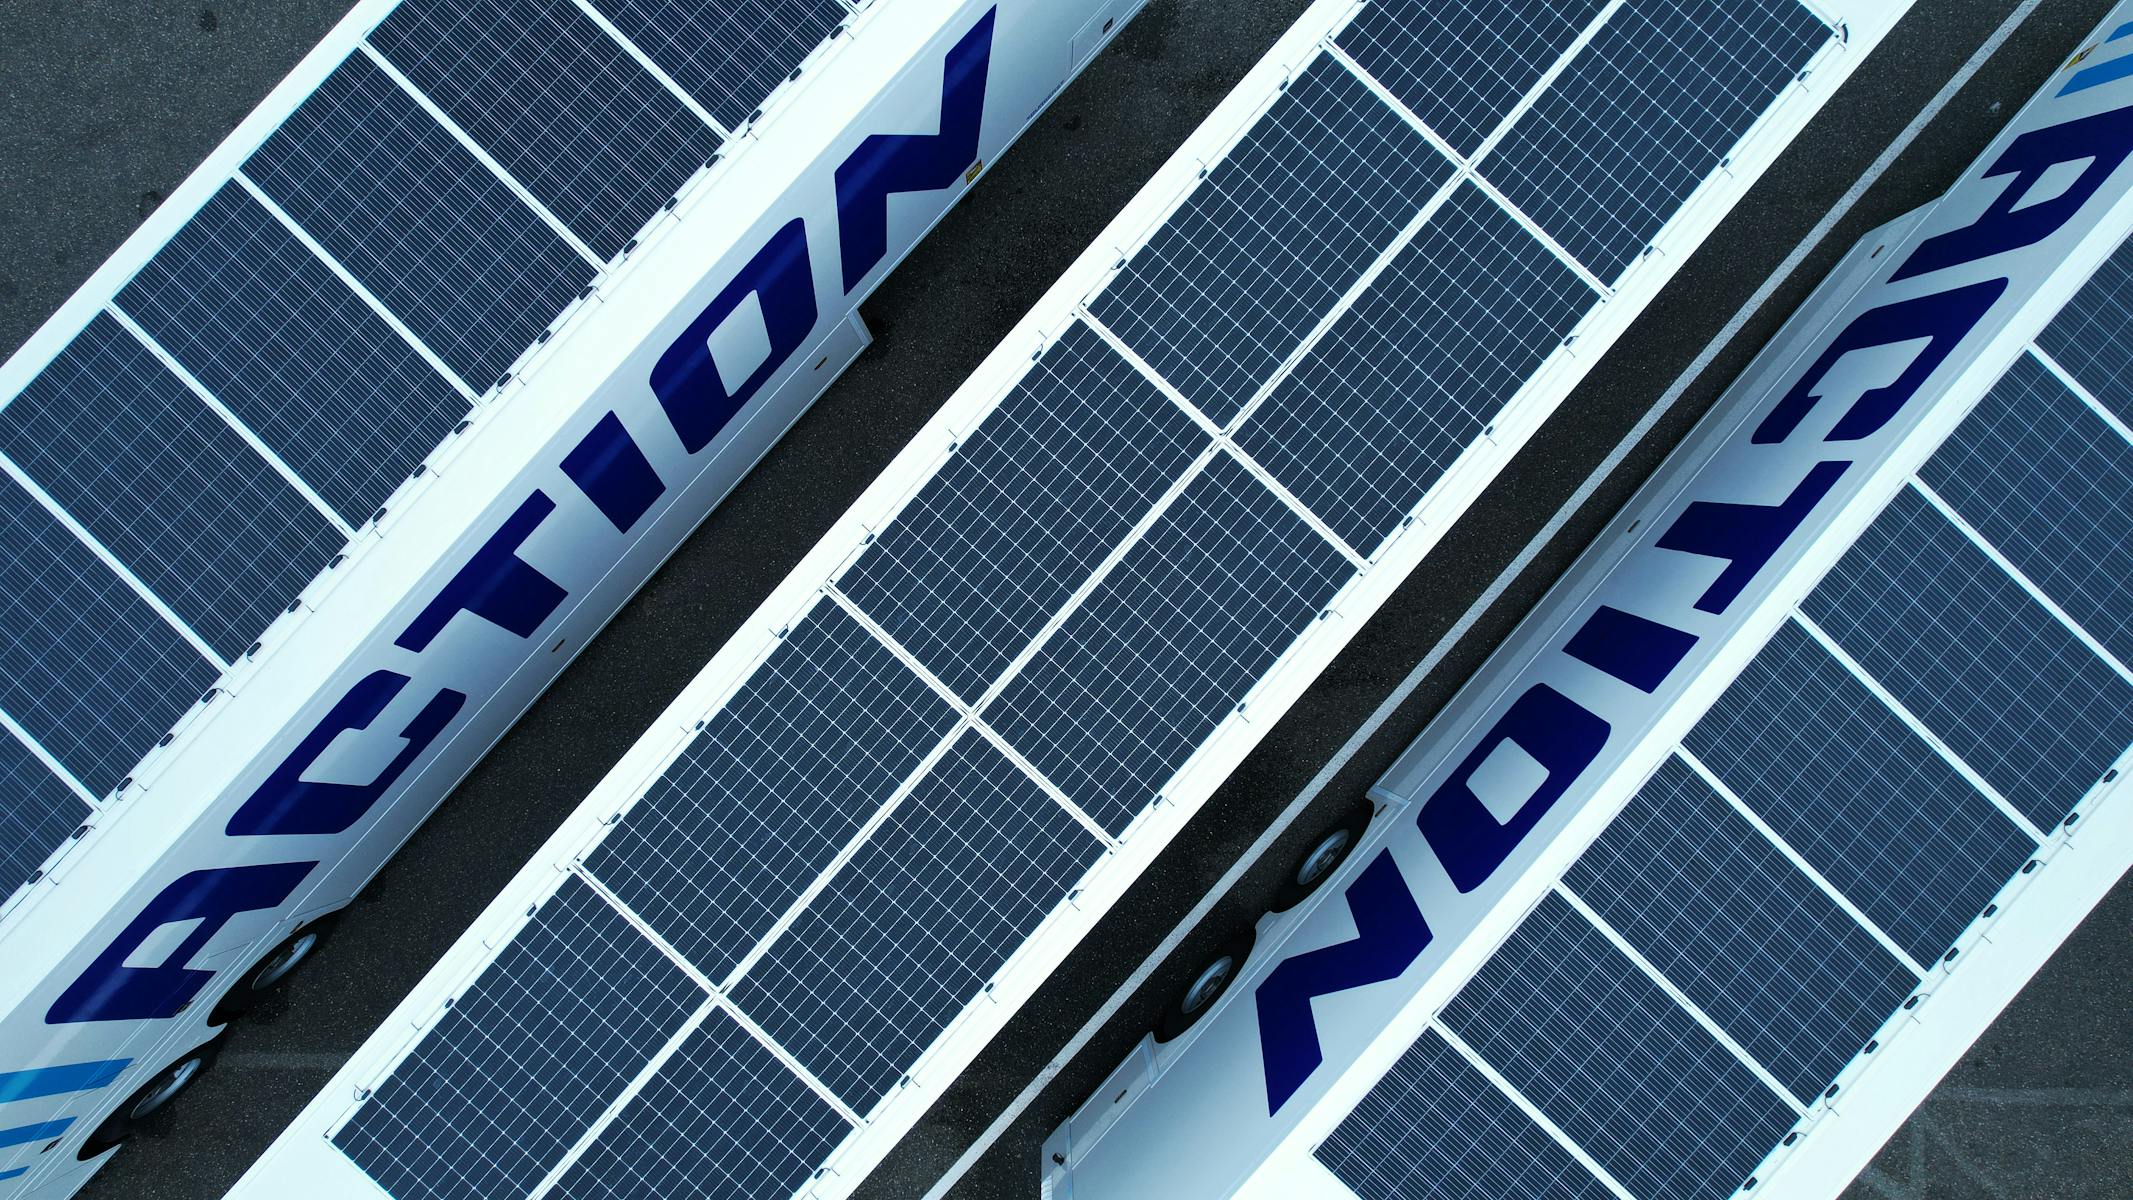 Solar panels atop the action truck